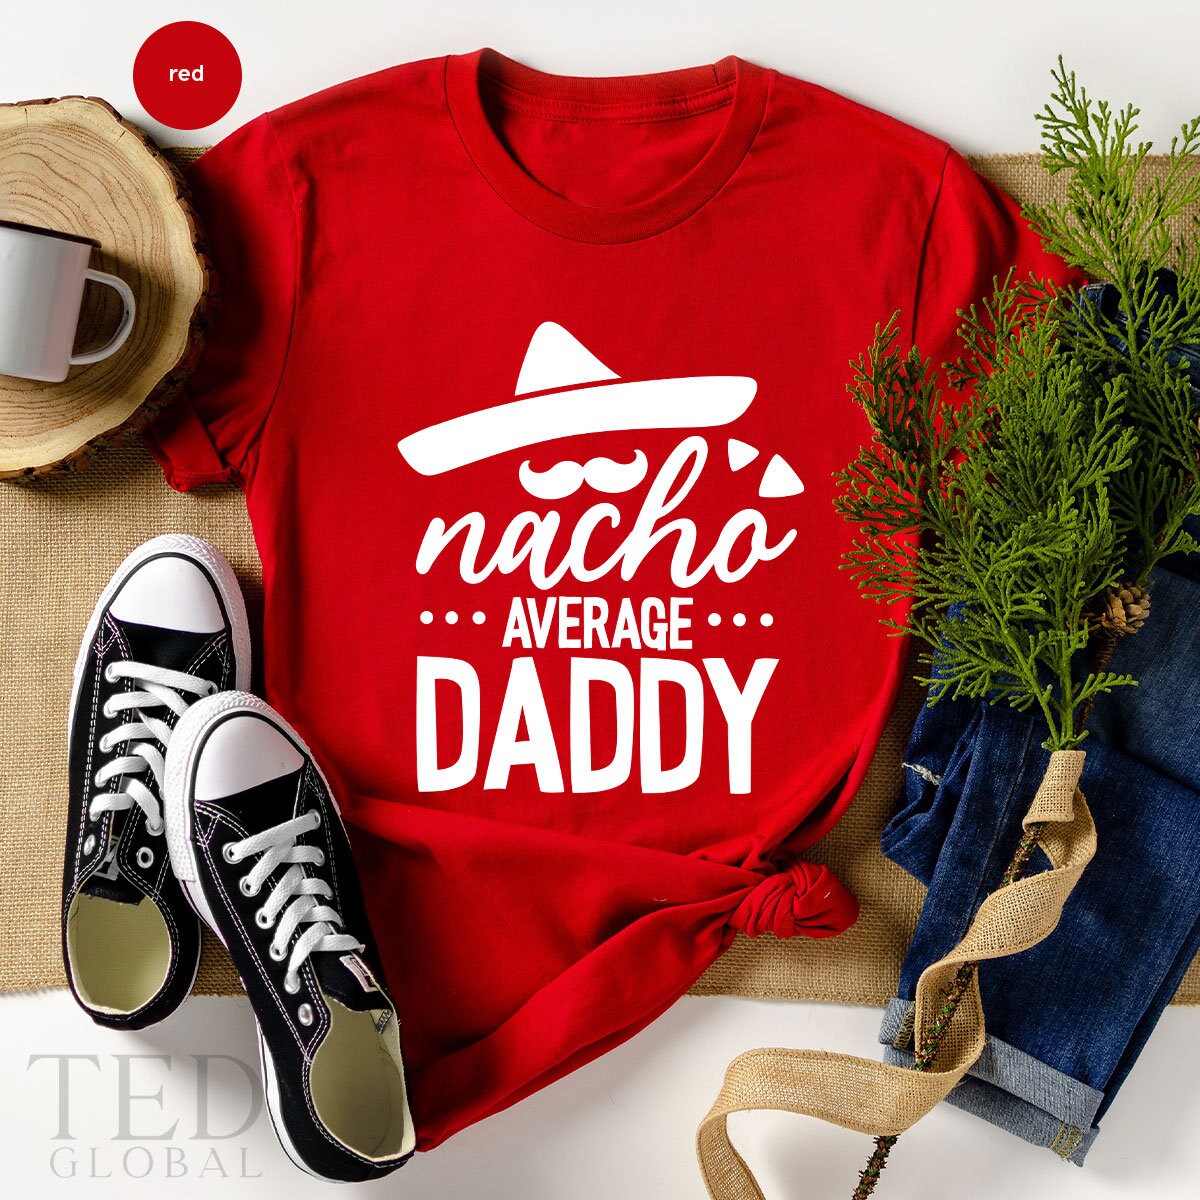 Funny Dad TShirt, Fathers Day Shirt, Nacho Dad Shirt, Fatherhood T Shirt, Dad Birthday Gift, Nacho Average Daddy Tee, Mexican Dad T-Shirt, - Fastdeliverytees.com